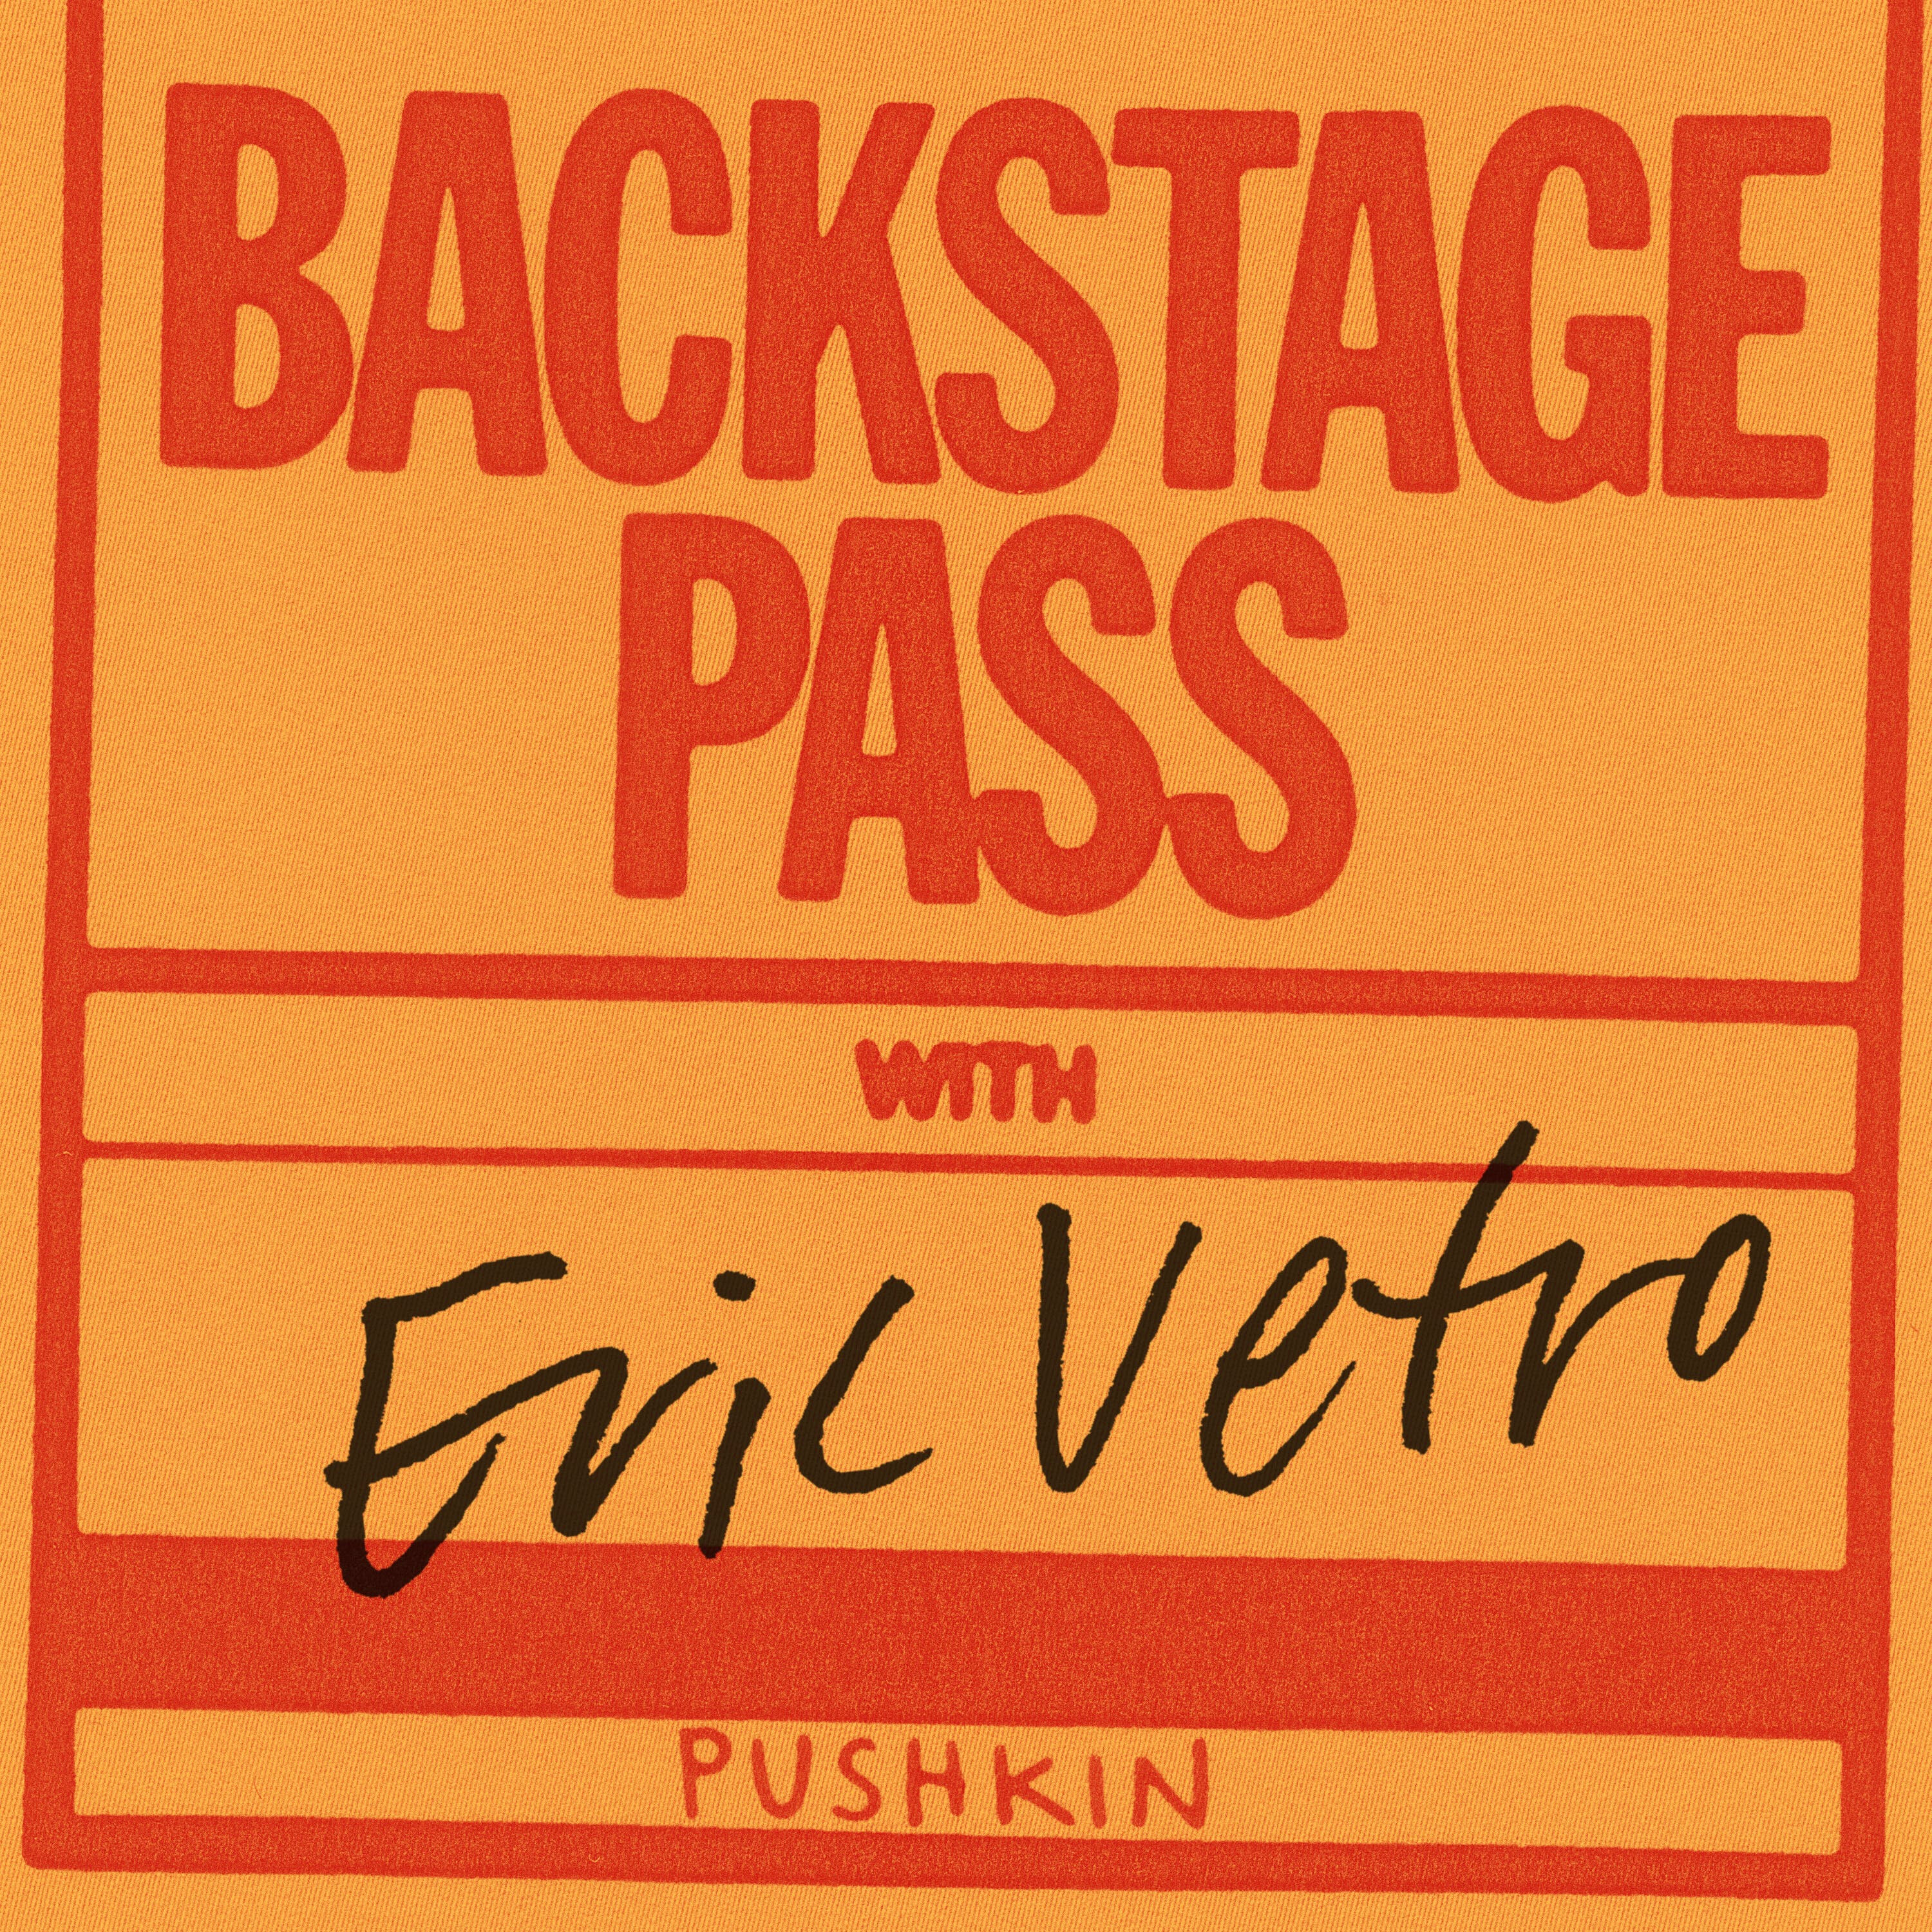 Backstage Pass with Eric Vetro podcast show image